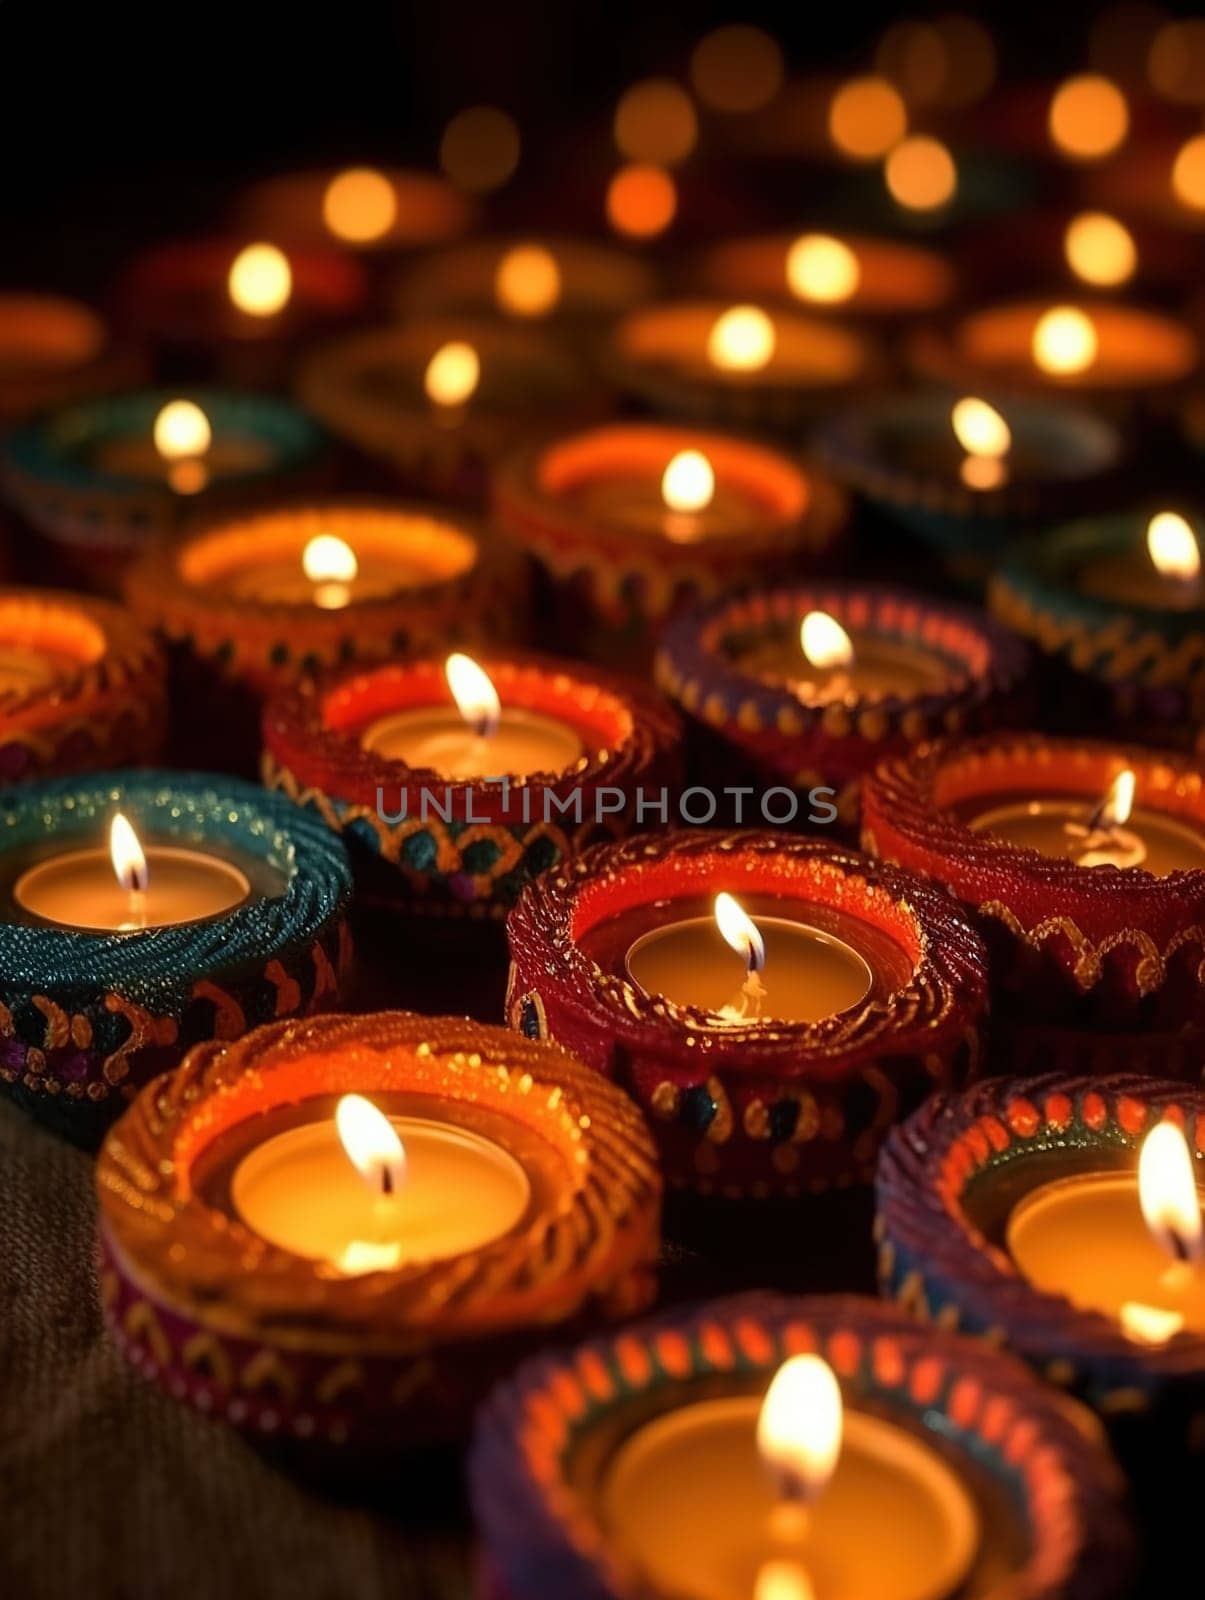 Divali Candles Lighting Up The Holiday by tan4ikk1